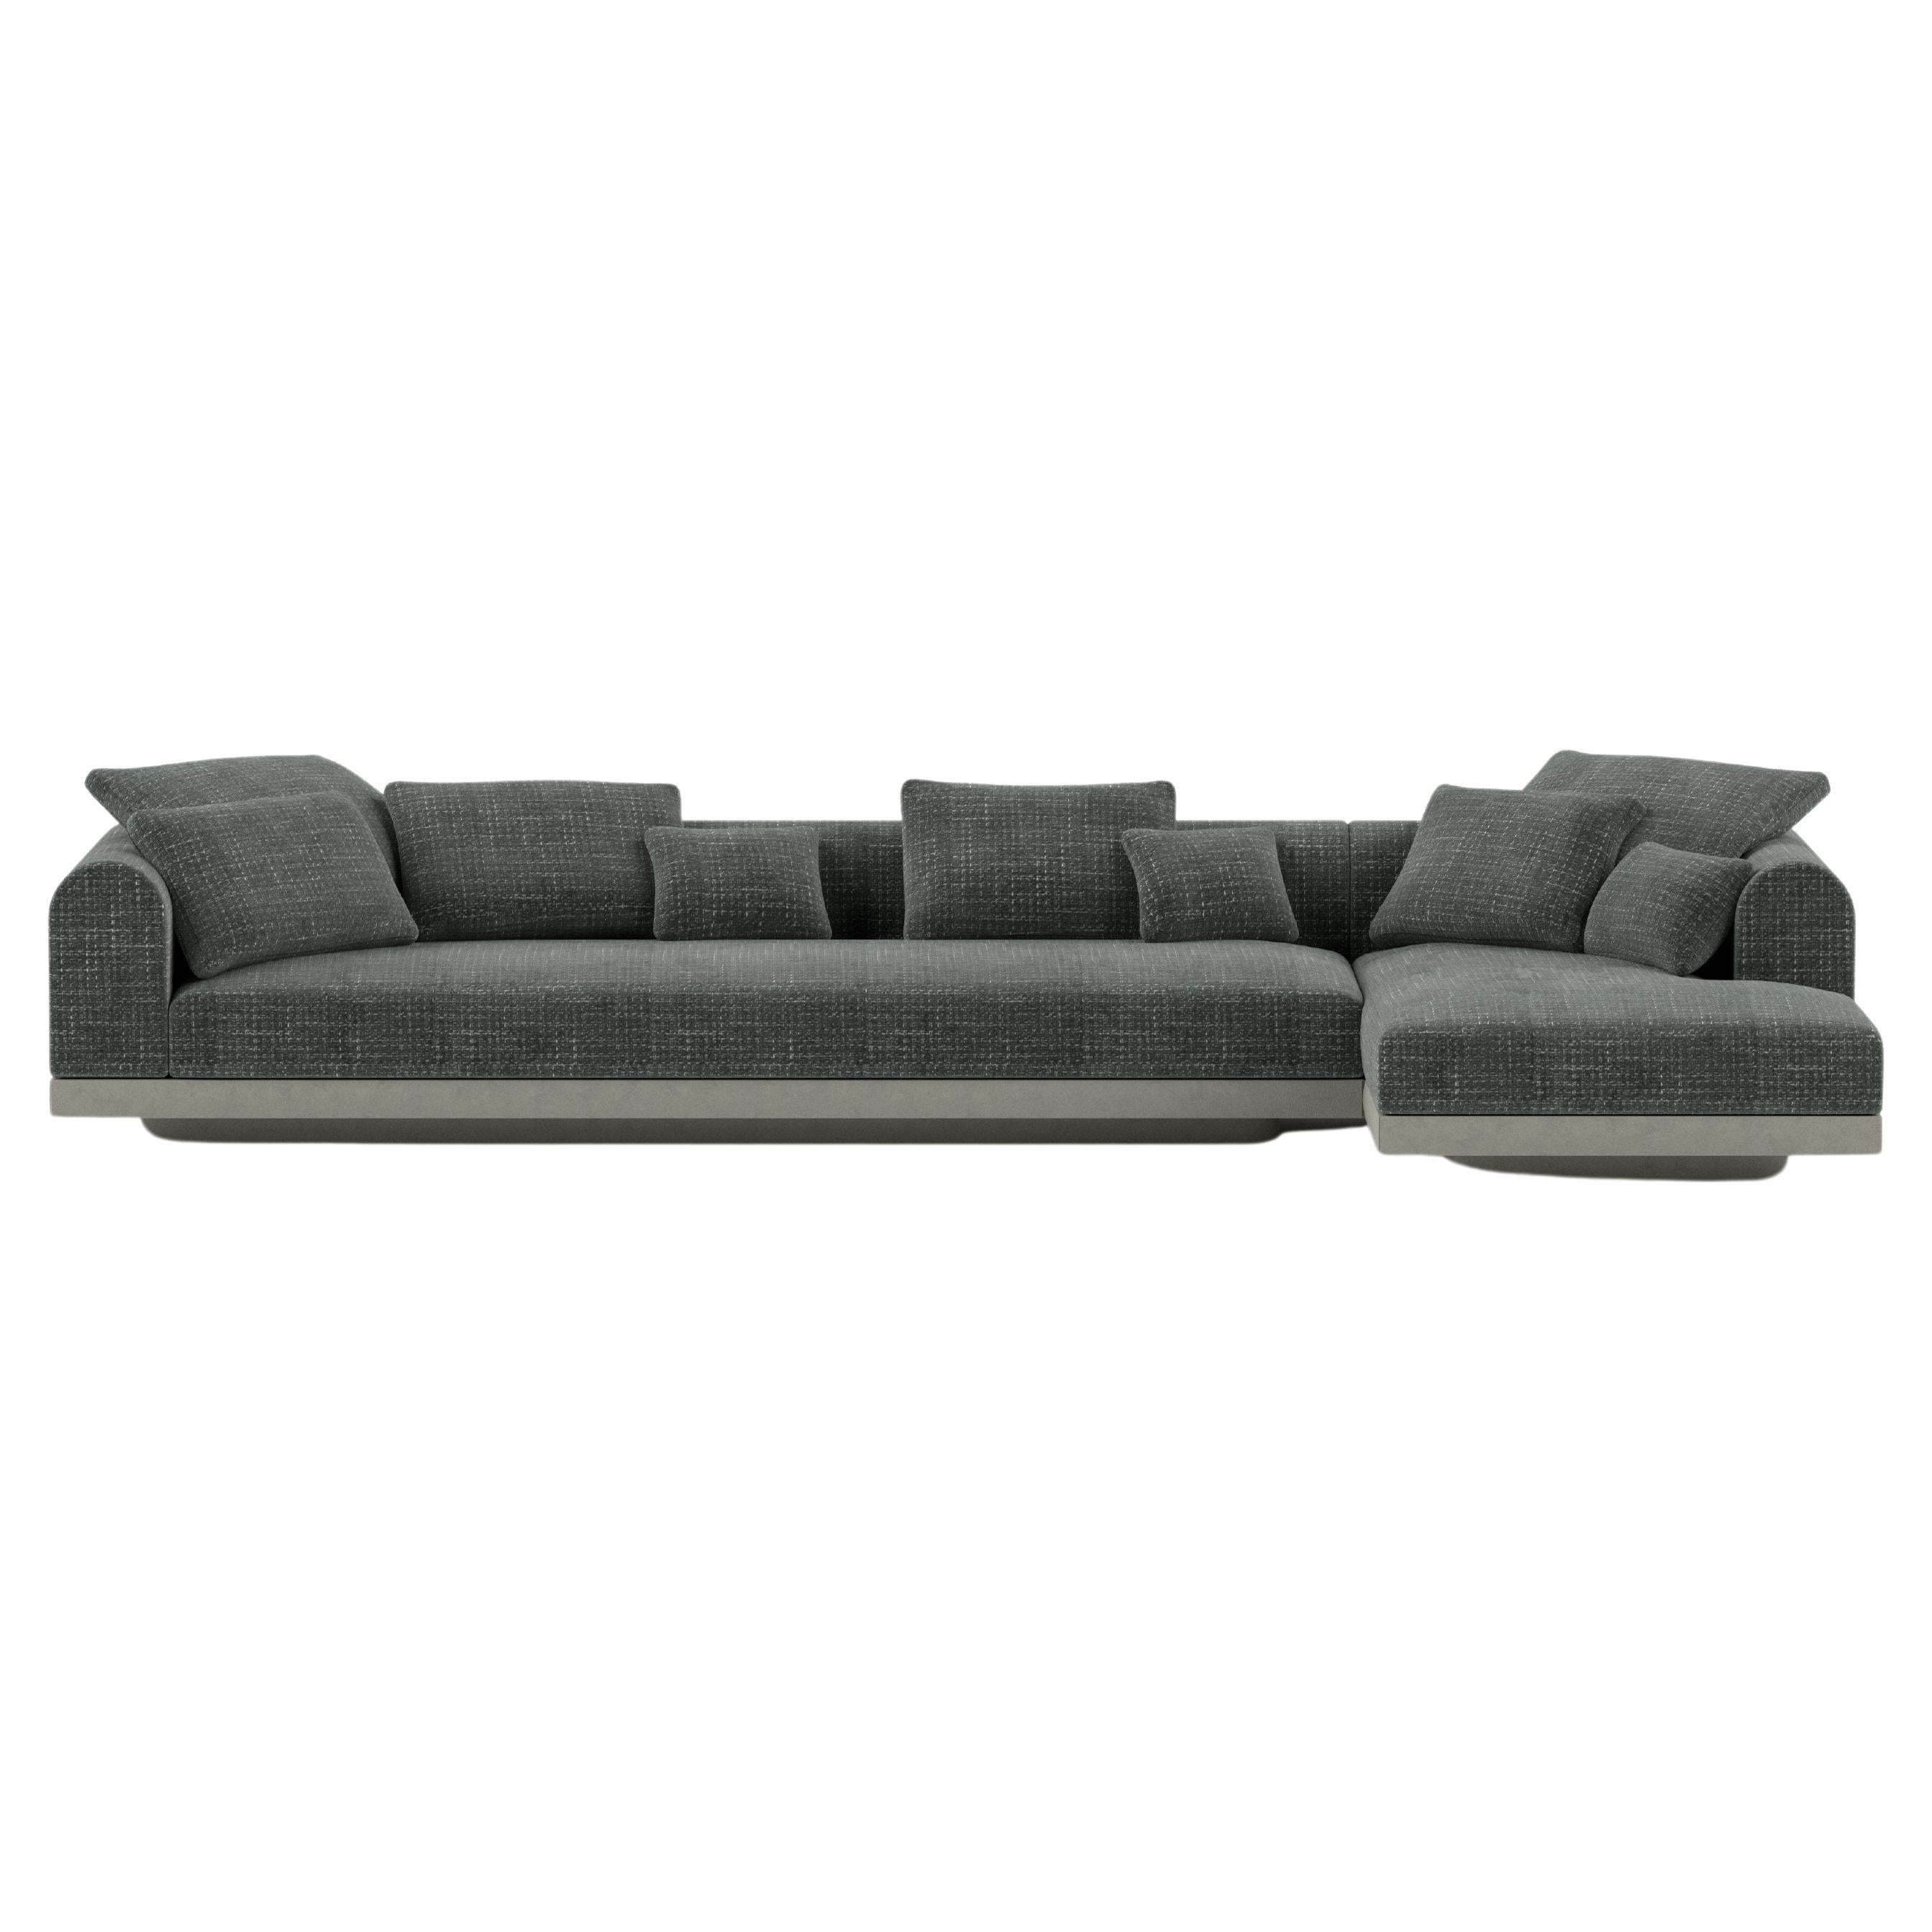 'Aqueduct' Contemporary Sofa by Poiat, Setup 2, Yang 95, High Plinth For Sale